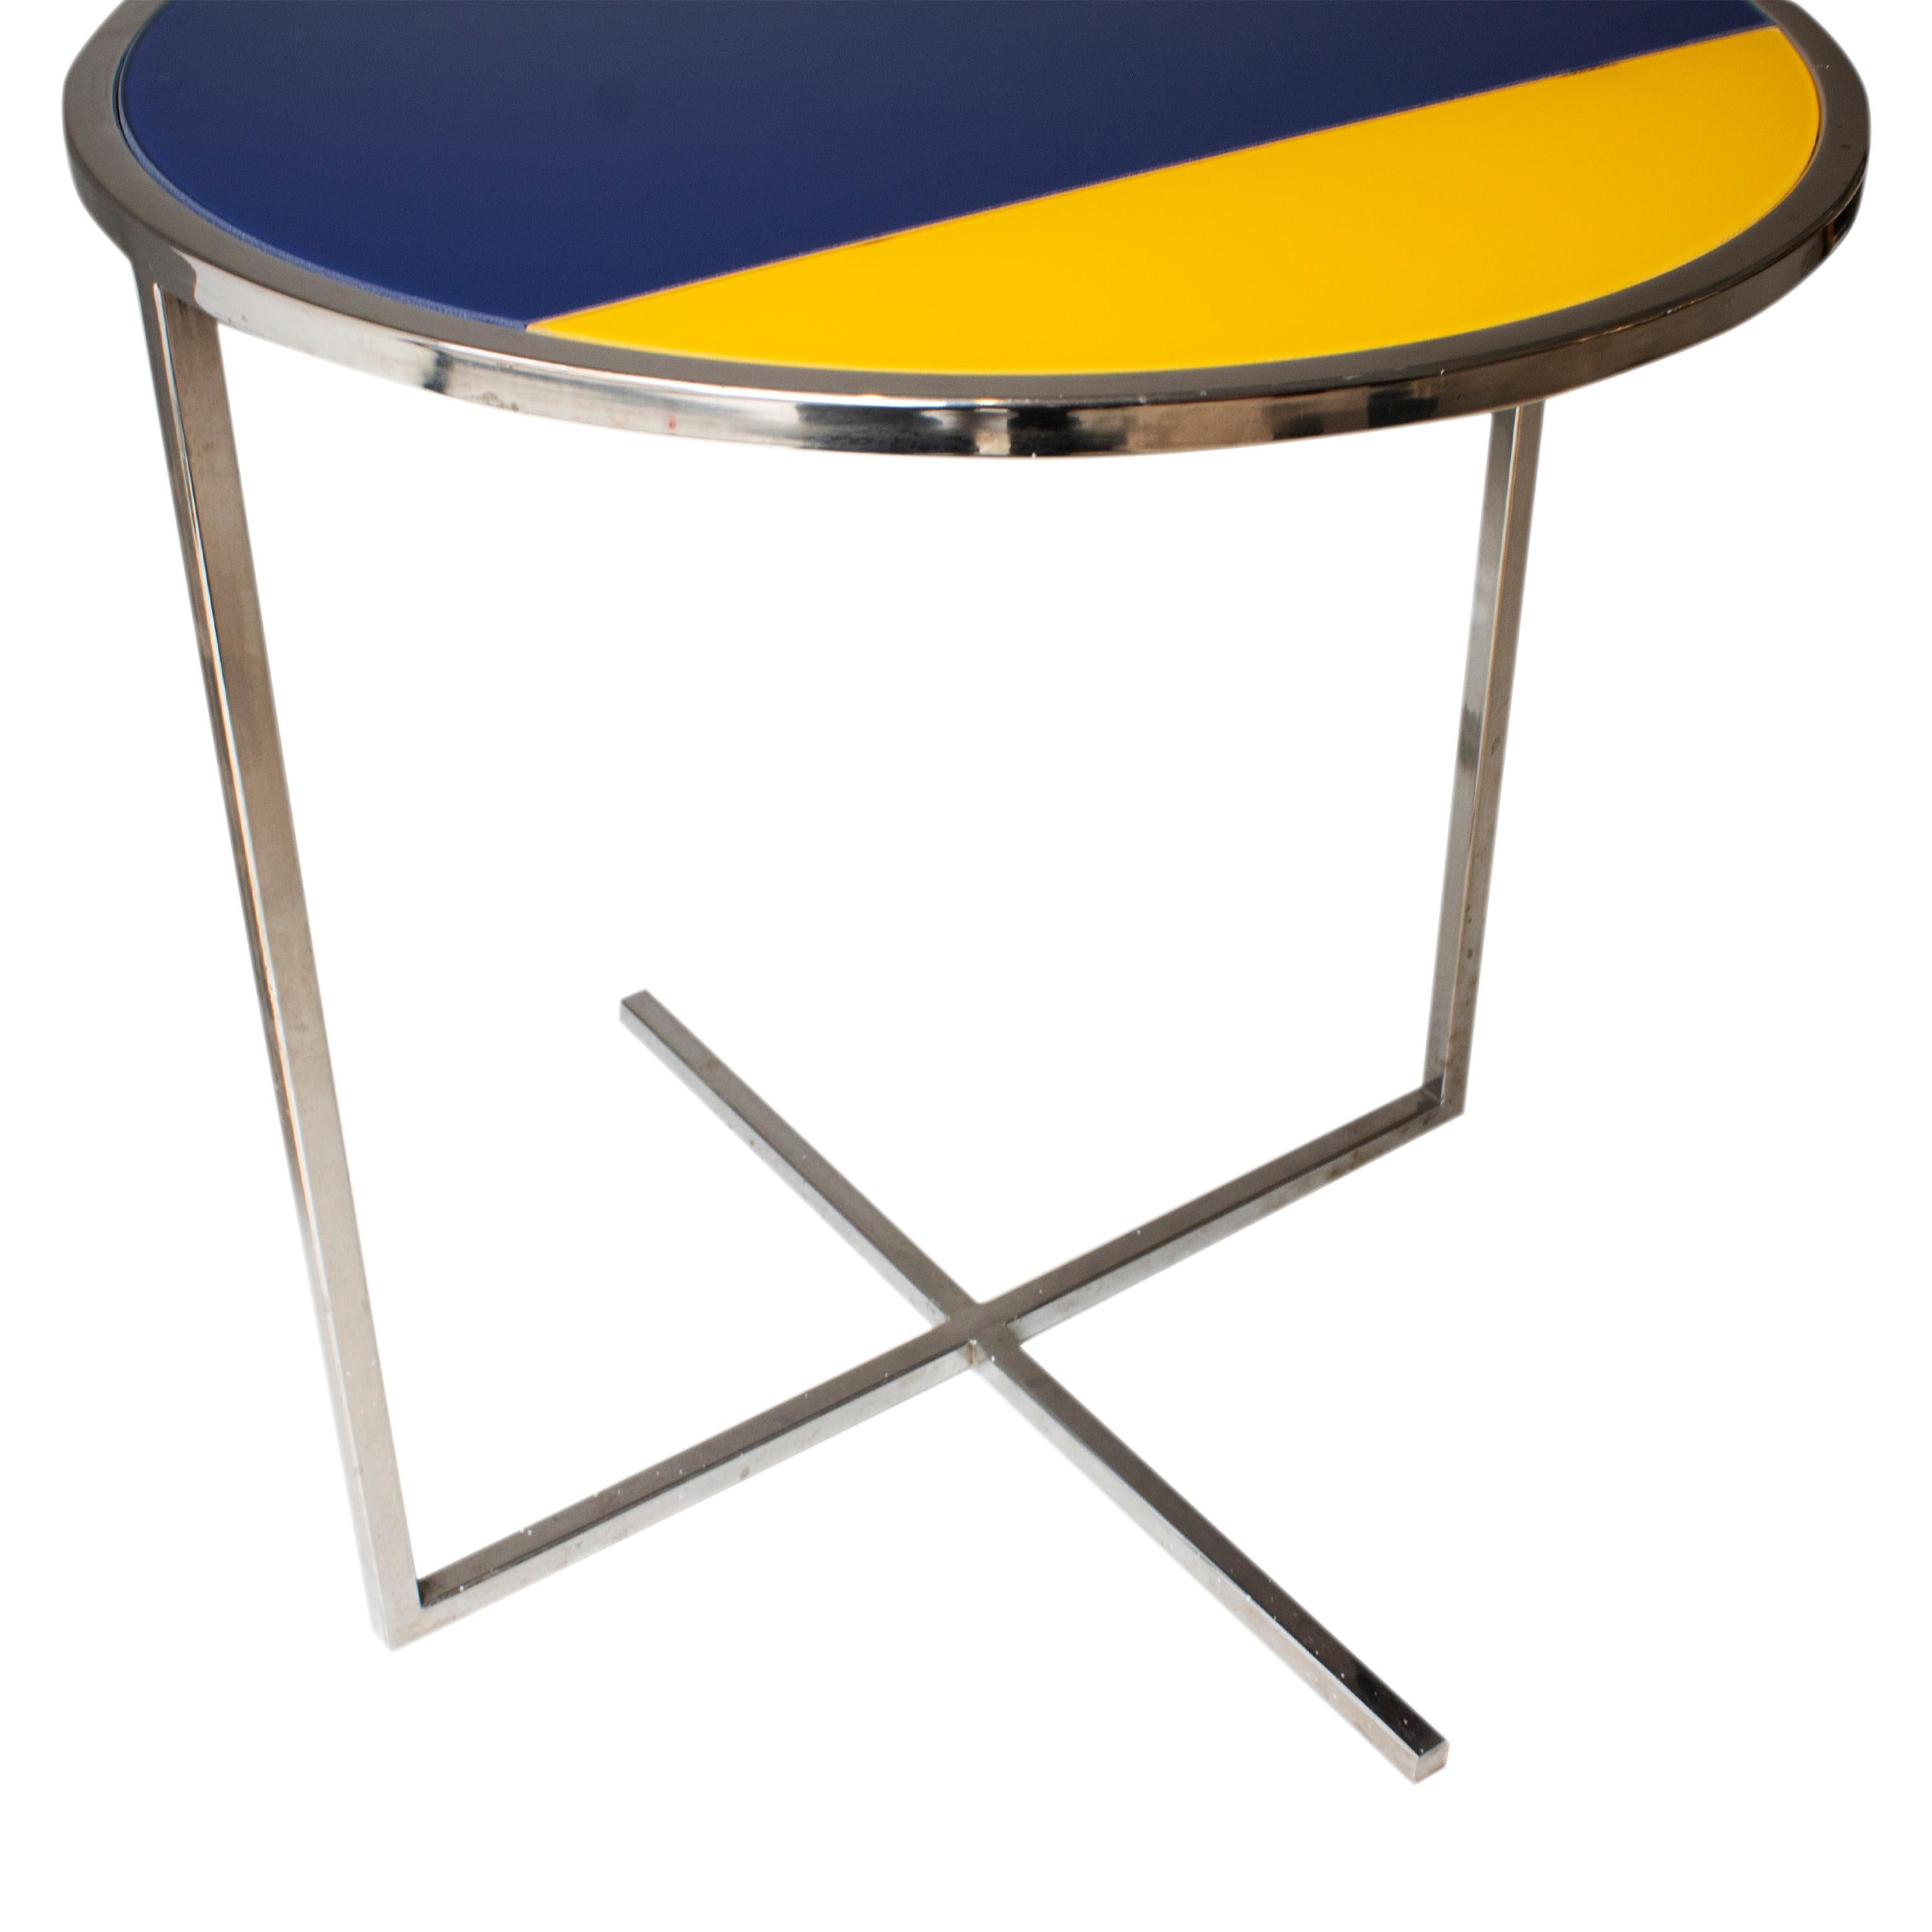 Post-Modern Contemporary Chromed Steel Blue and Yellow Glass Round Center Table, Italy, 1970 For Sale